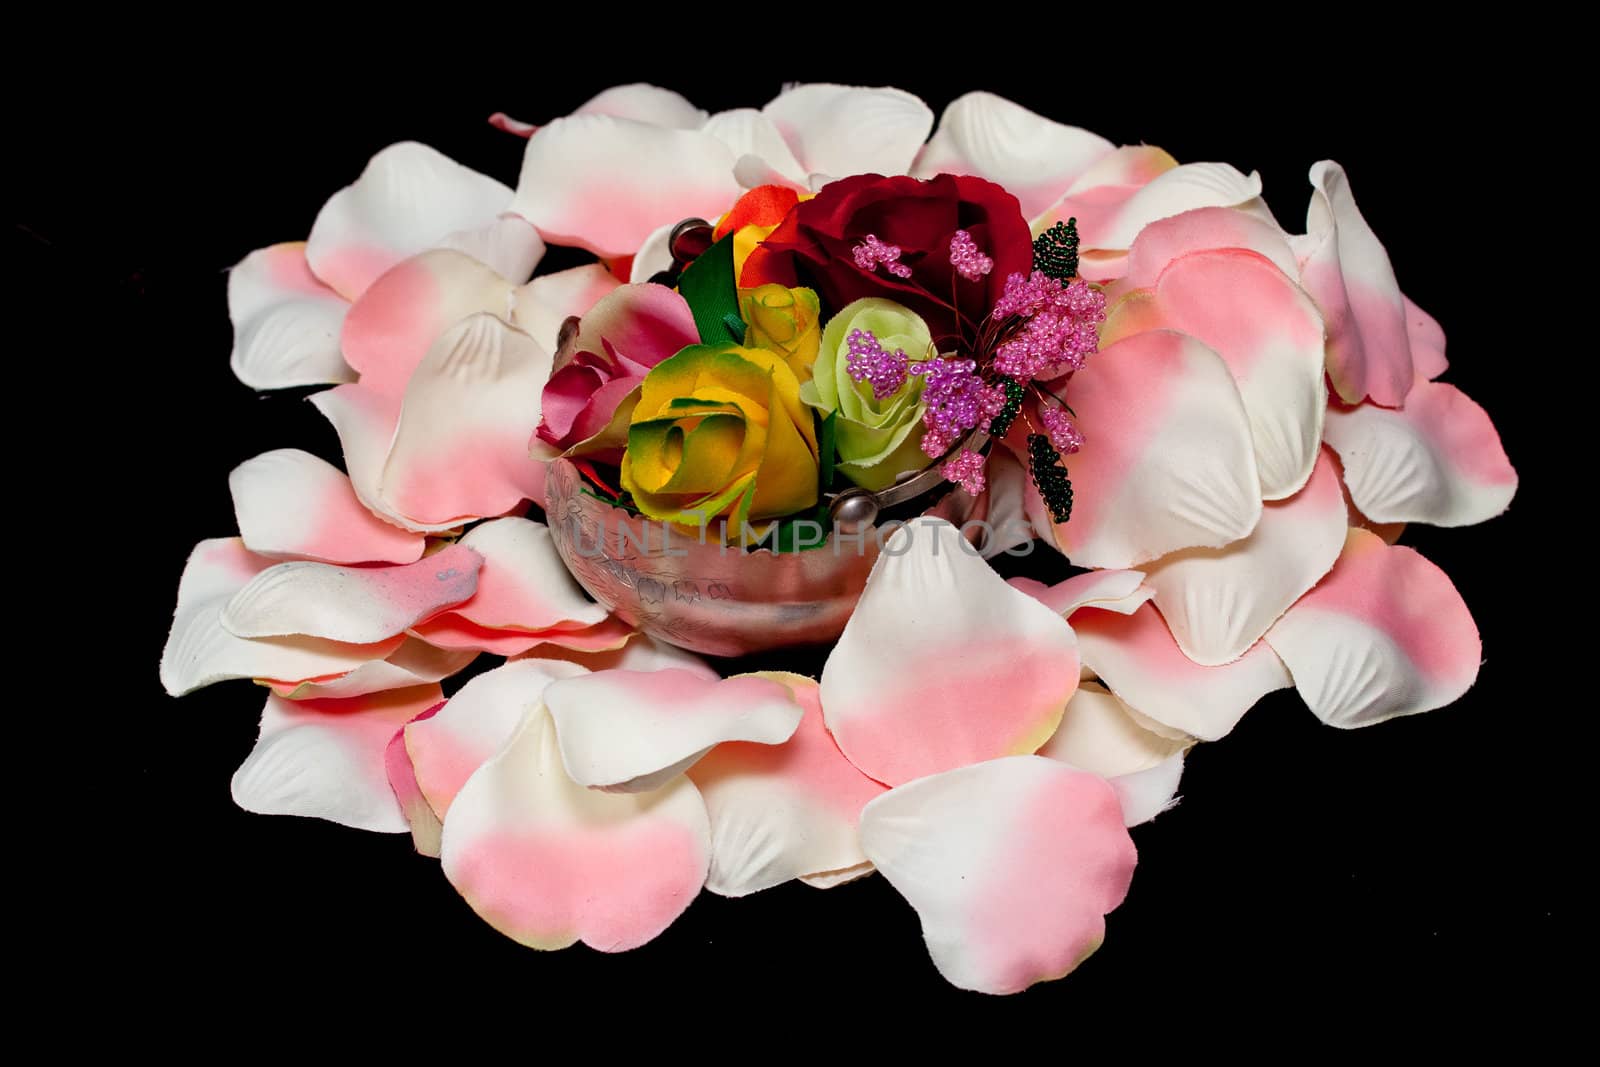 A silver basket with artificial roses on white and pink rose textile petals on black
